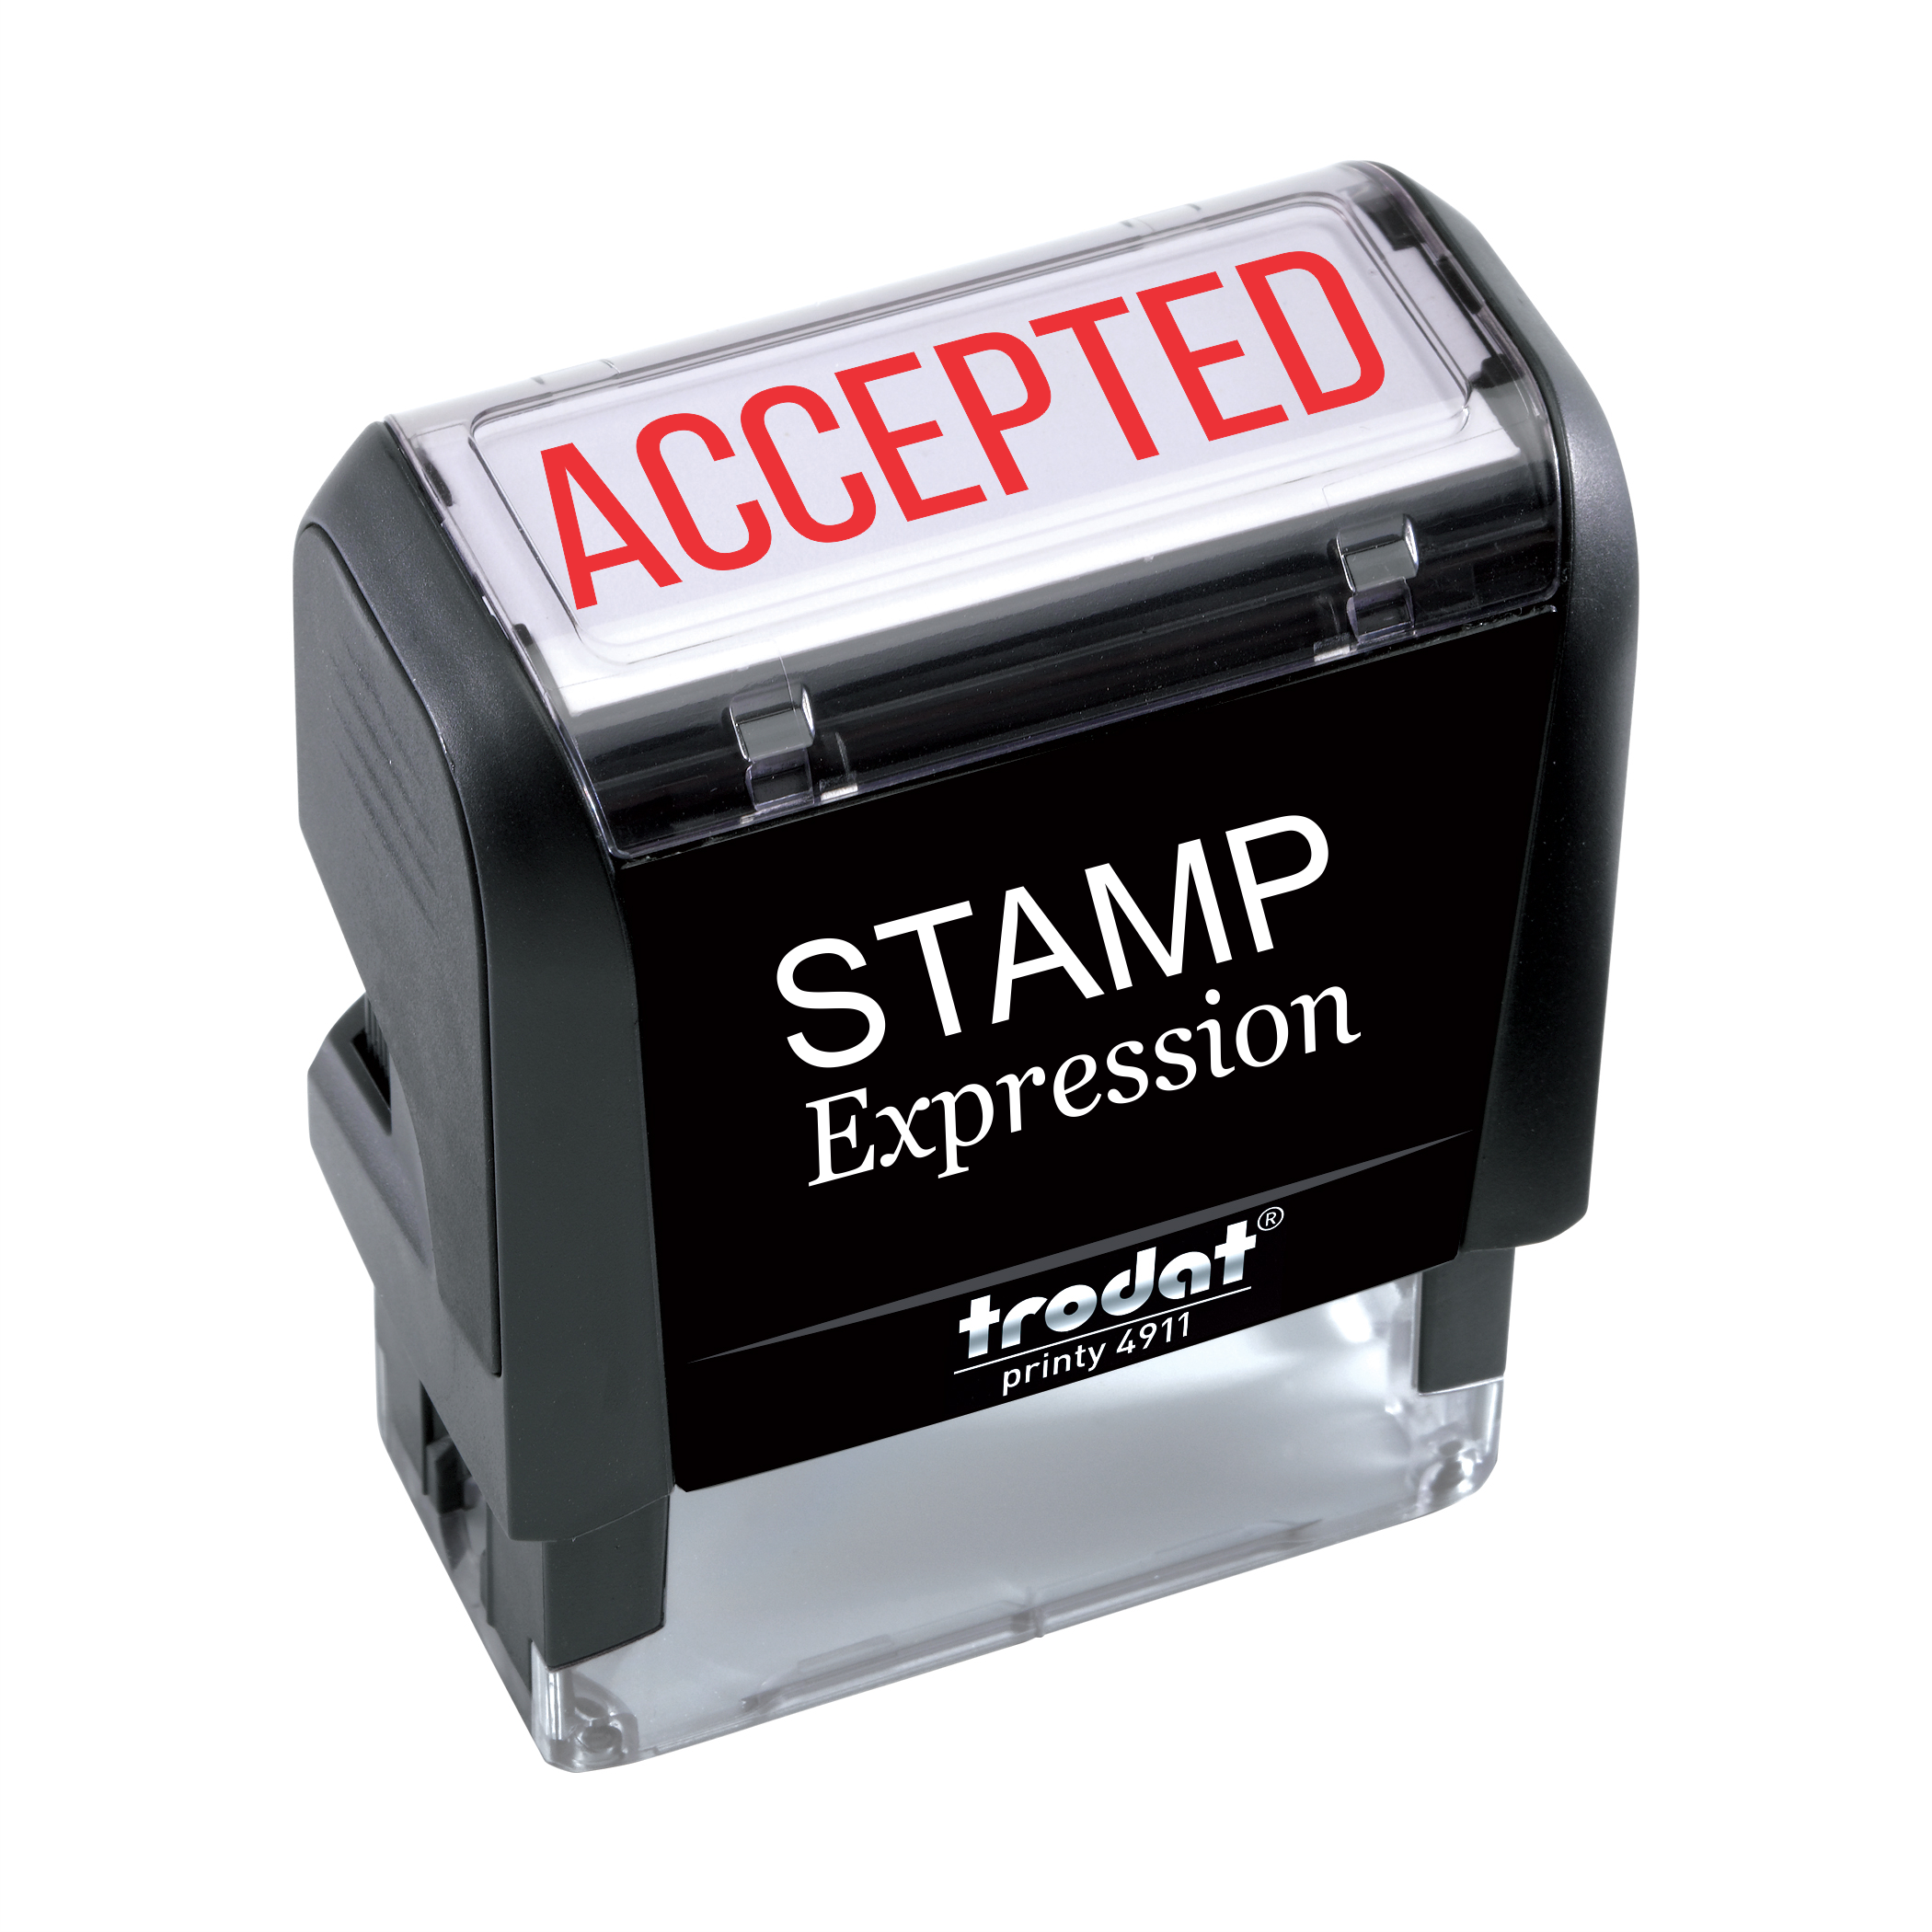 Accepted Office Self Inking Rubber Stamp